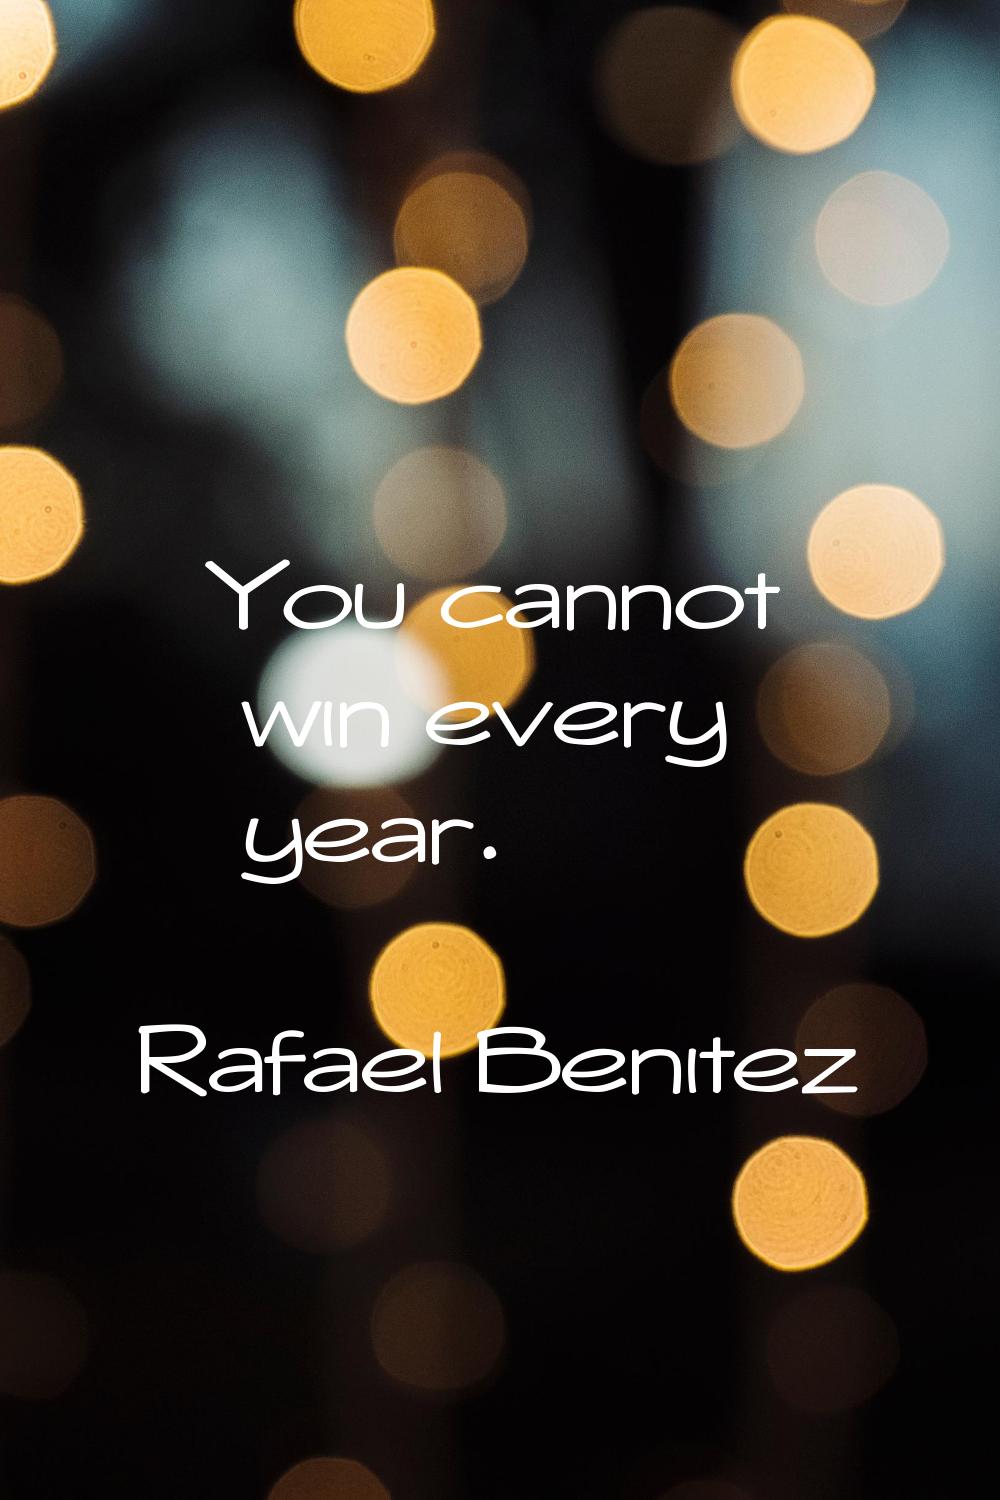 You cannot win every year.